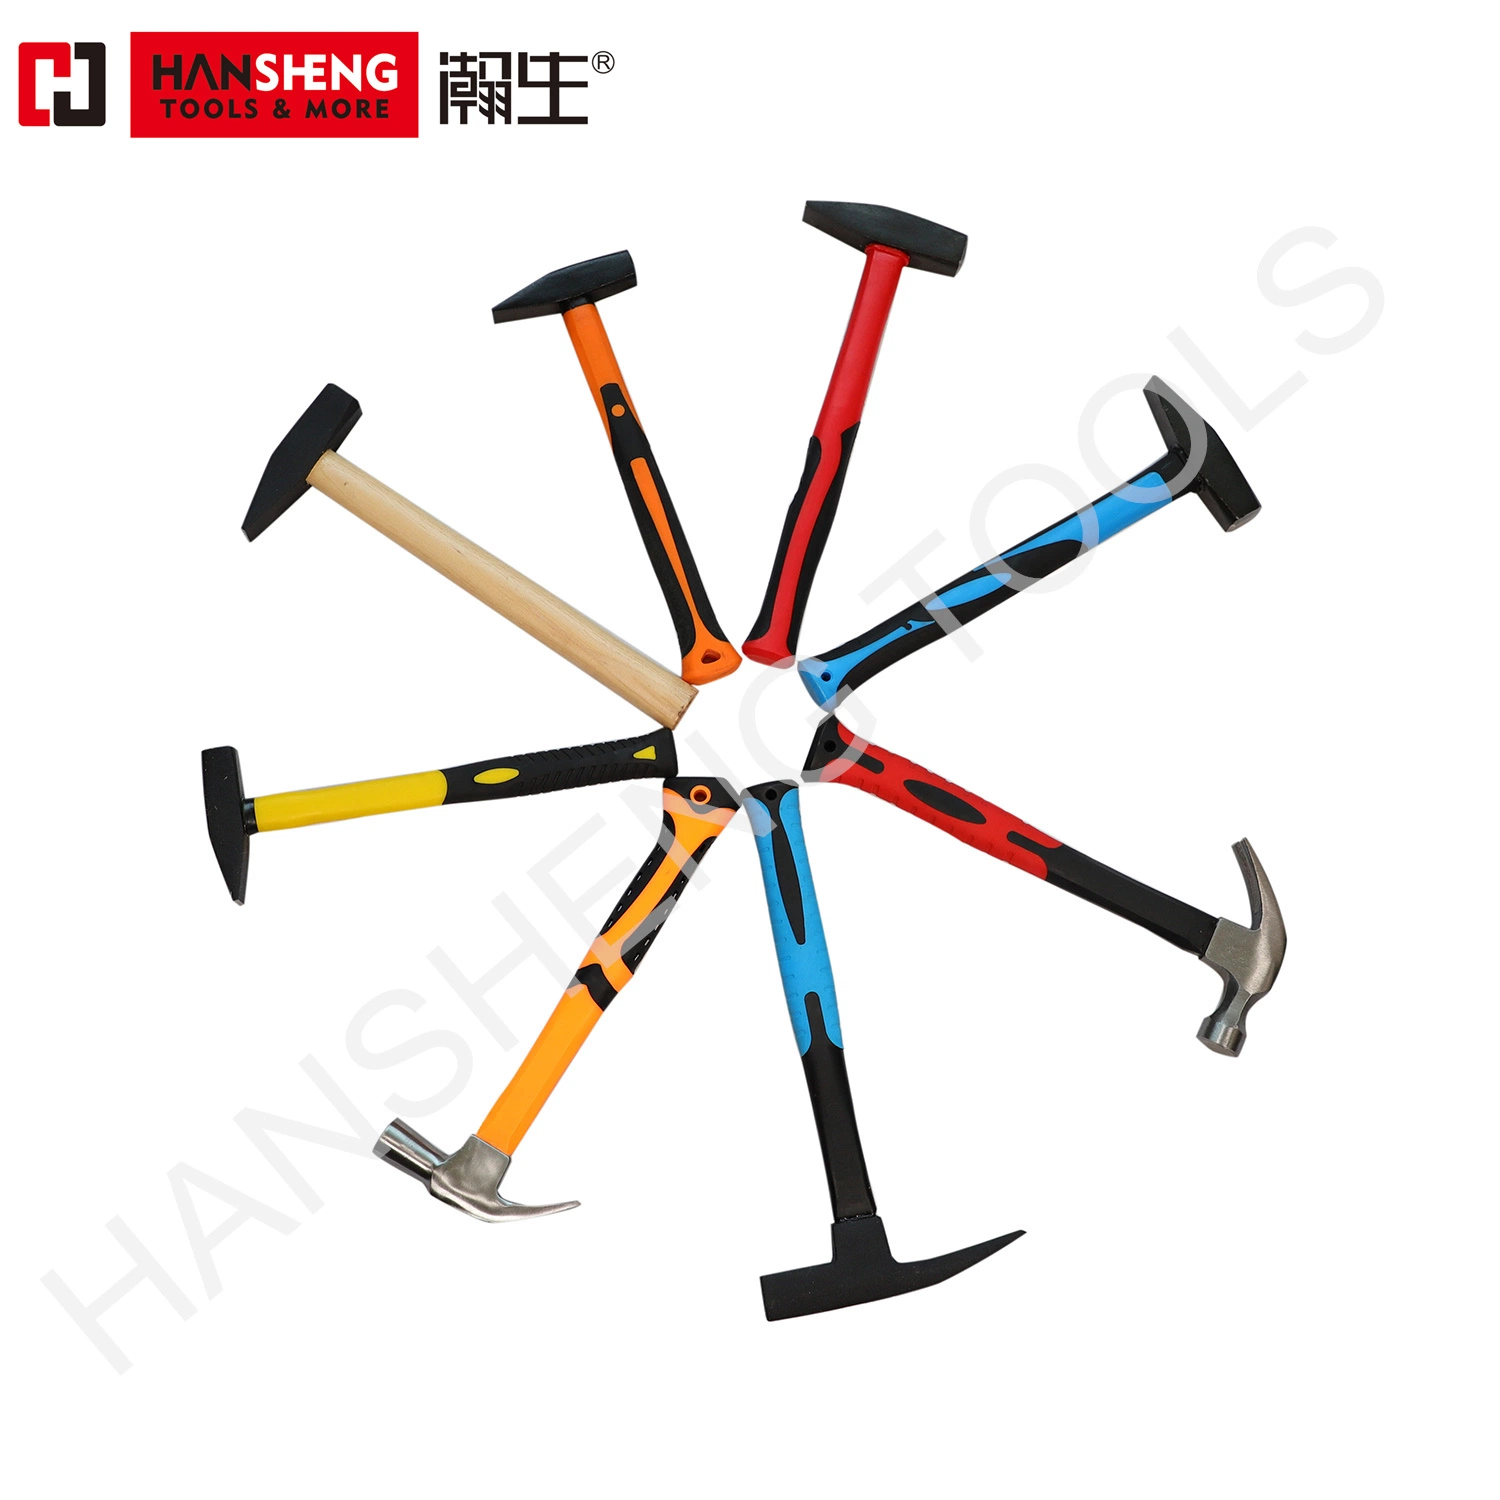 Professional Hammer, Hand Tools, Hardware Tools, Made of Carbon Steel, Full Head Polished, Mirror Polish, Wooden Handle, PVC Handle, Machinist Hammer